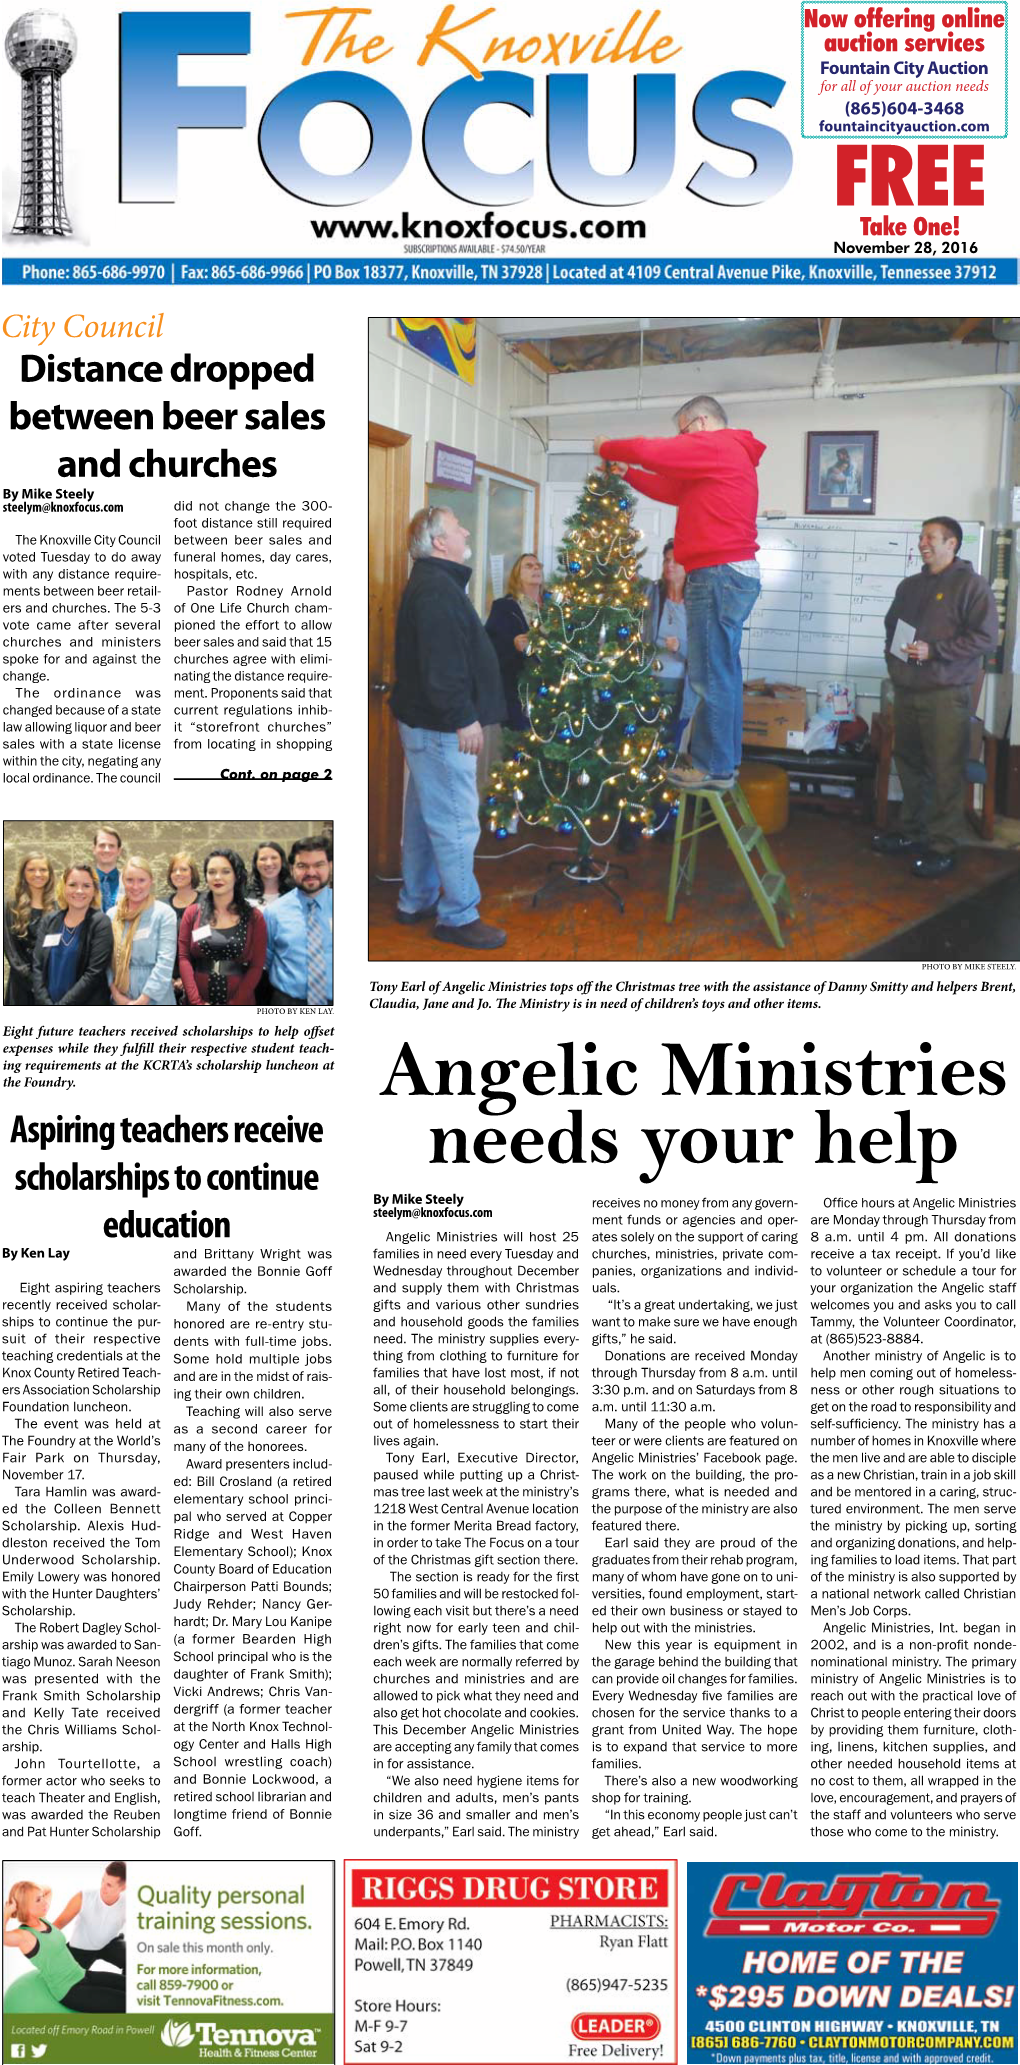 Angelic Ministries Needs Your Help